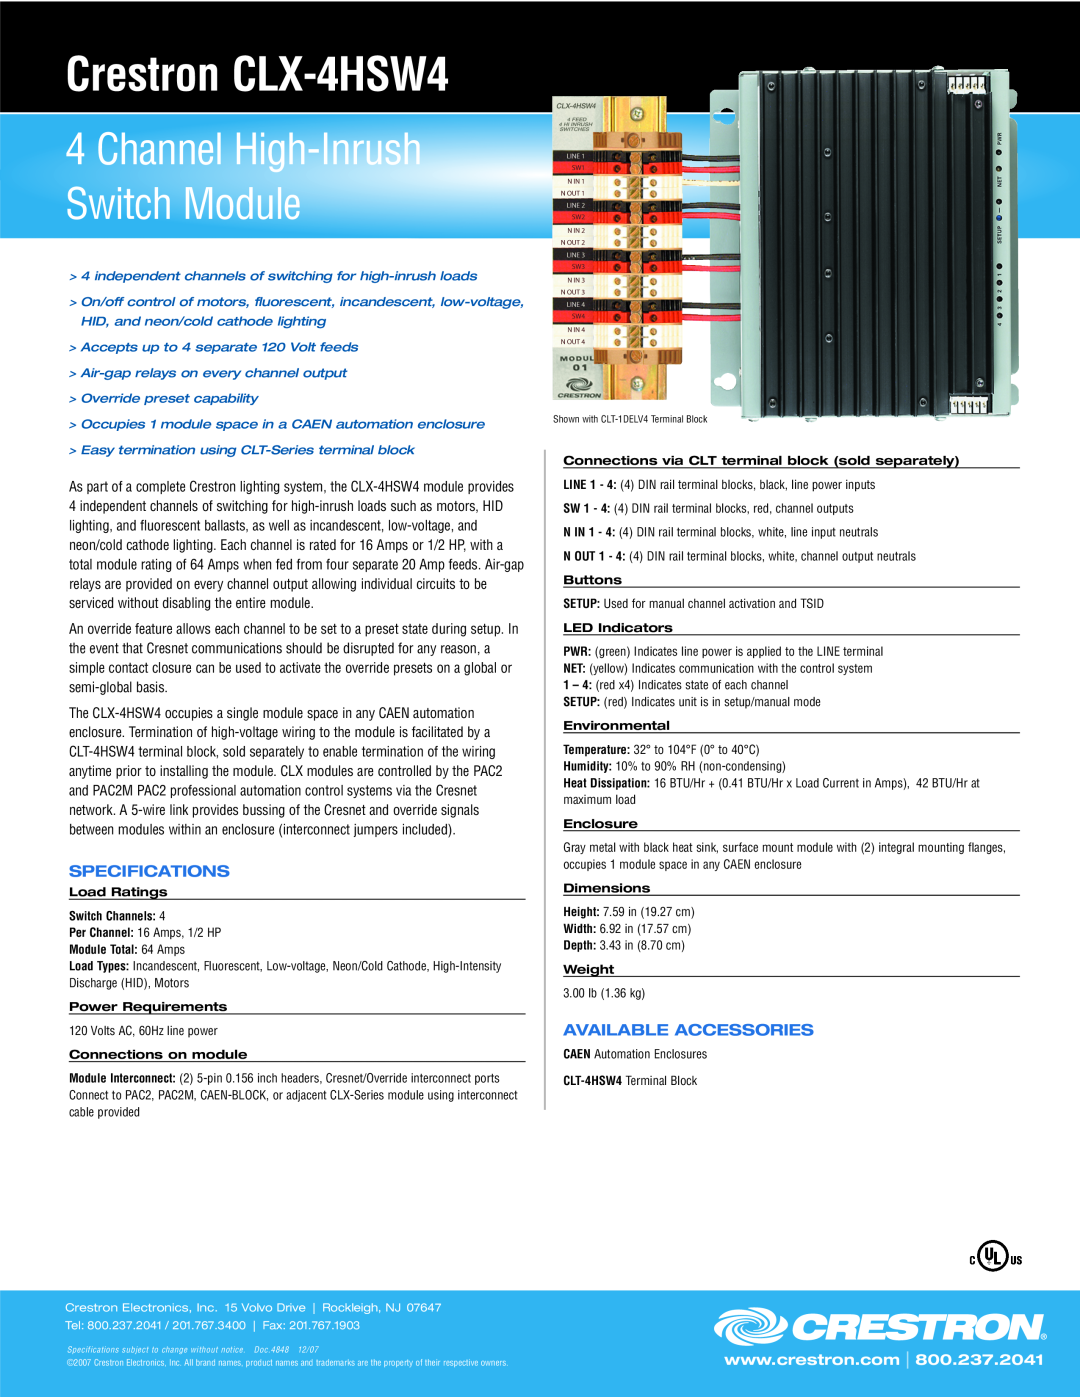 Crestron electronic specifications Crestron CLX-4HSW4, Channel High-Inrush Switch Module, Specifications, l Fax 